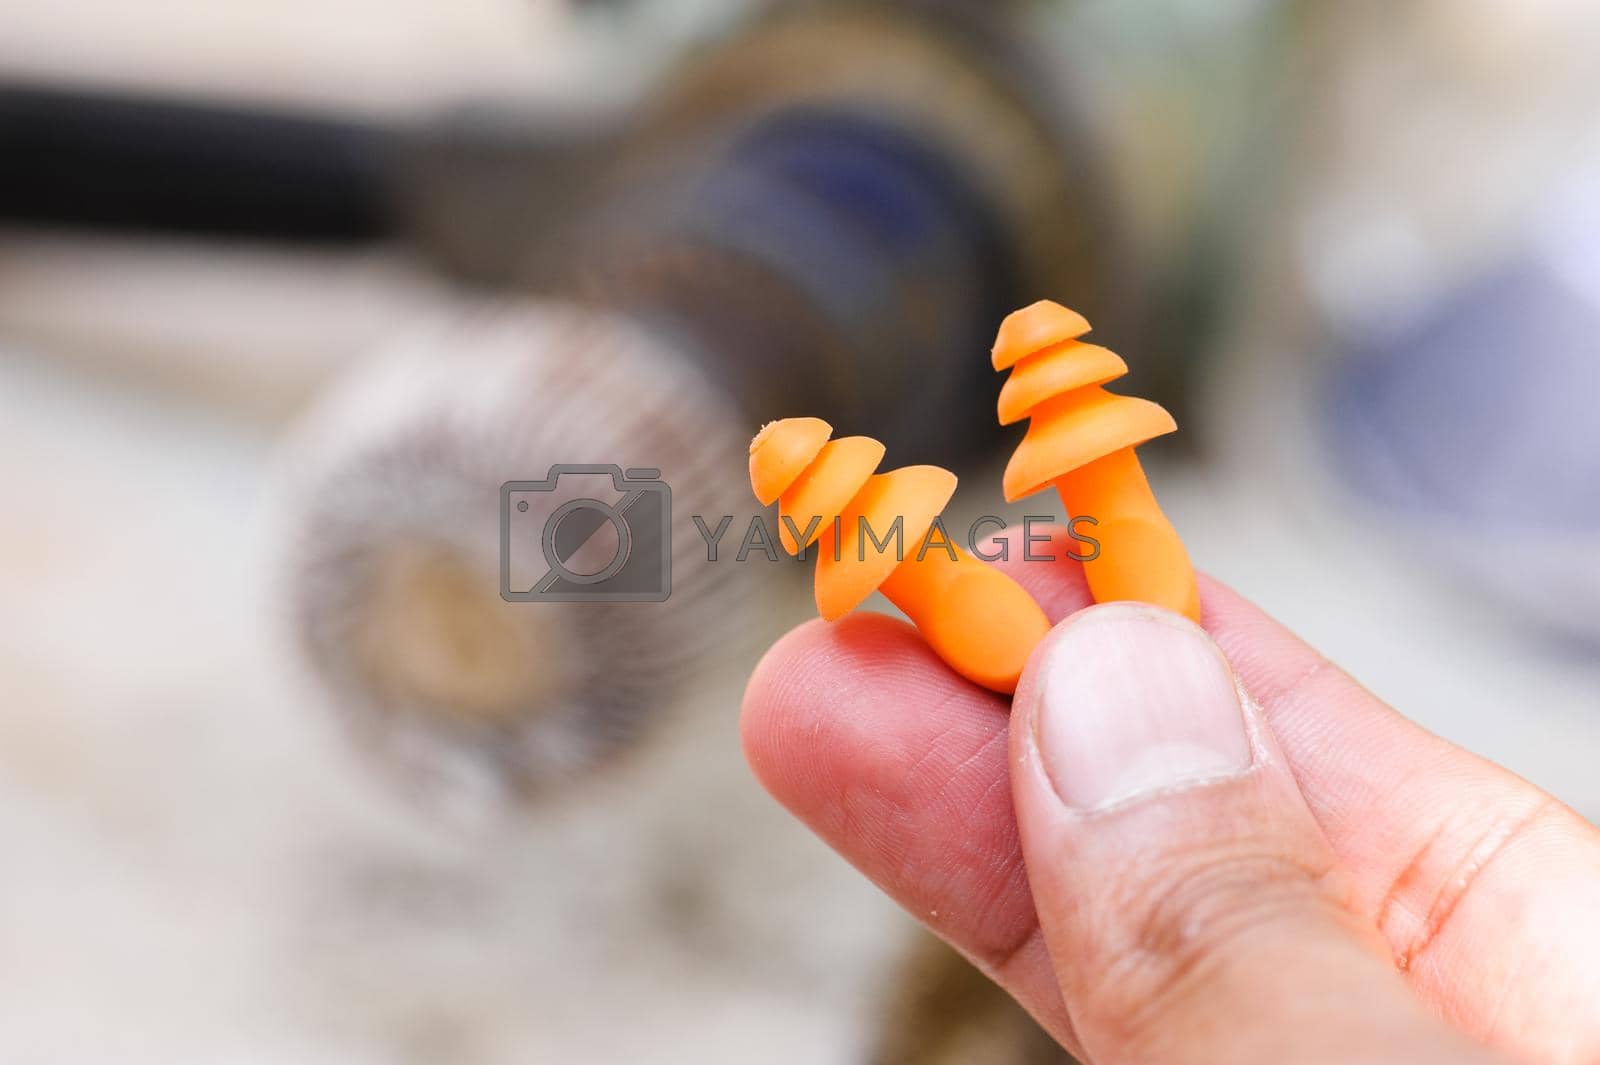 Royalty free image of reusable ear plugs by norgal